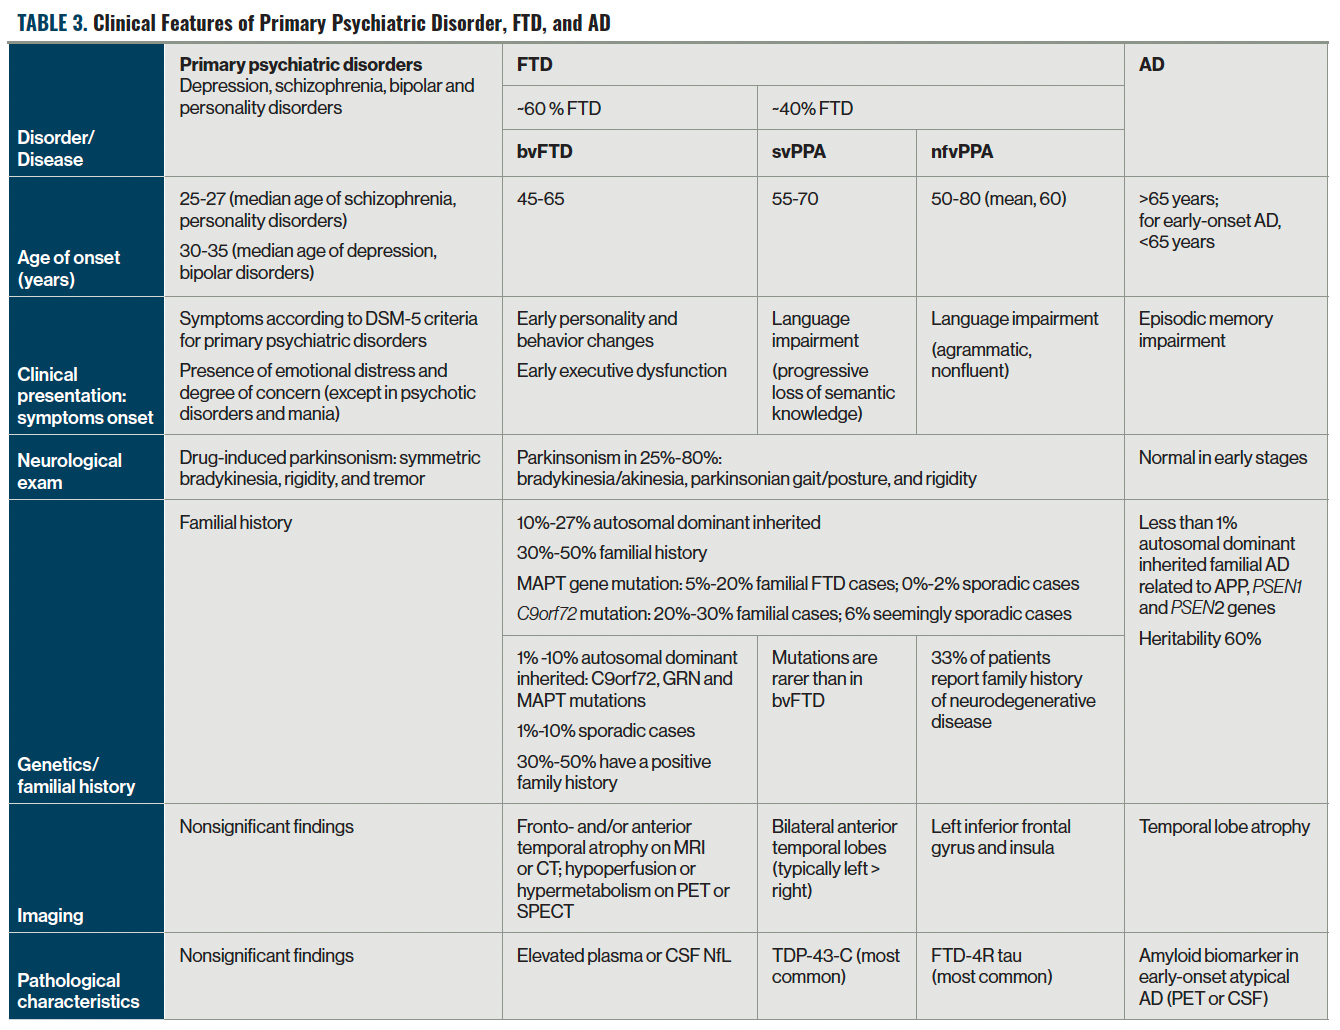 TABLE 3. Clinical Features of Primary Psychiatric Disorder, FTD, and AD